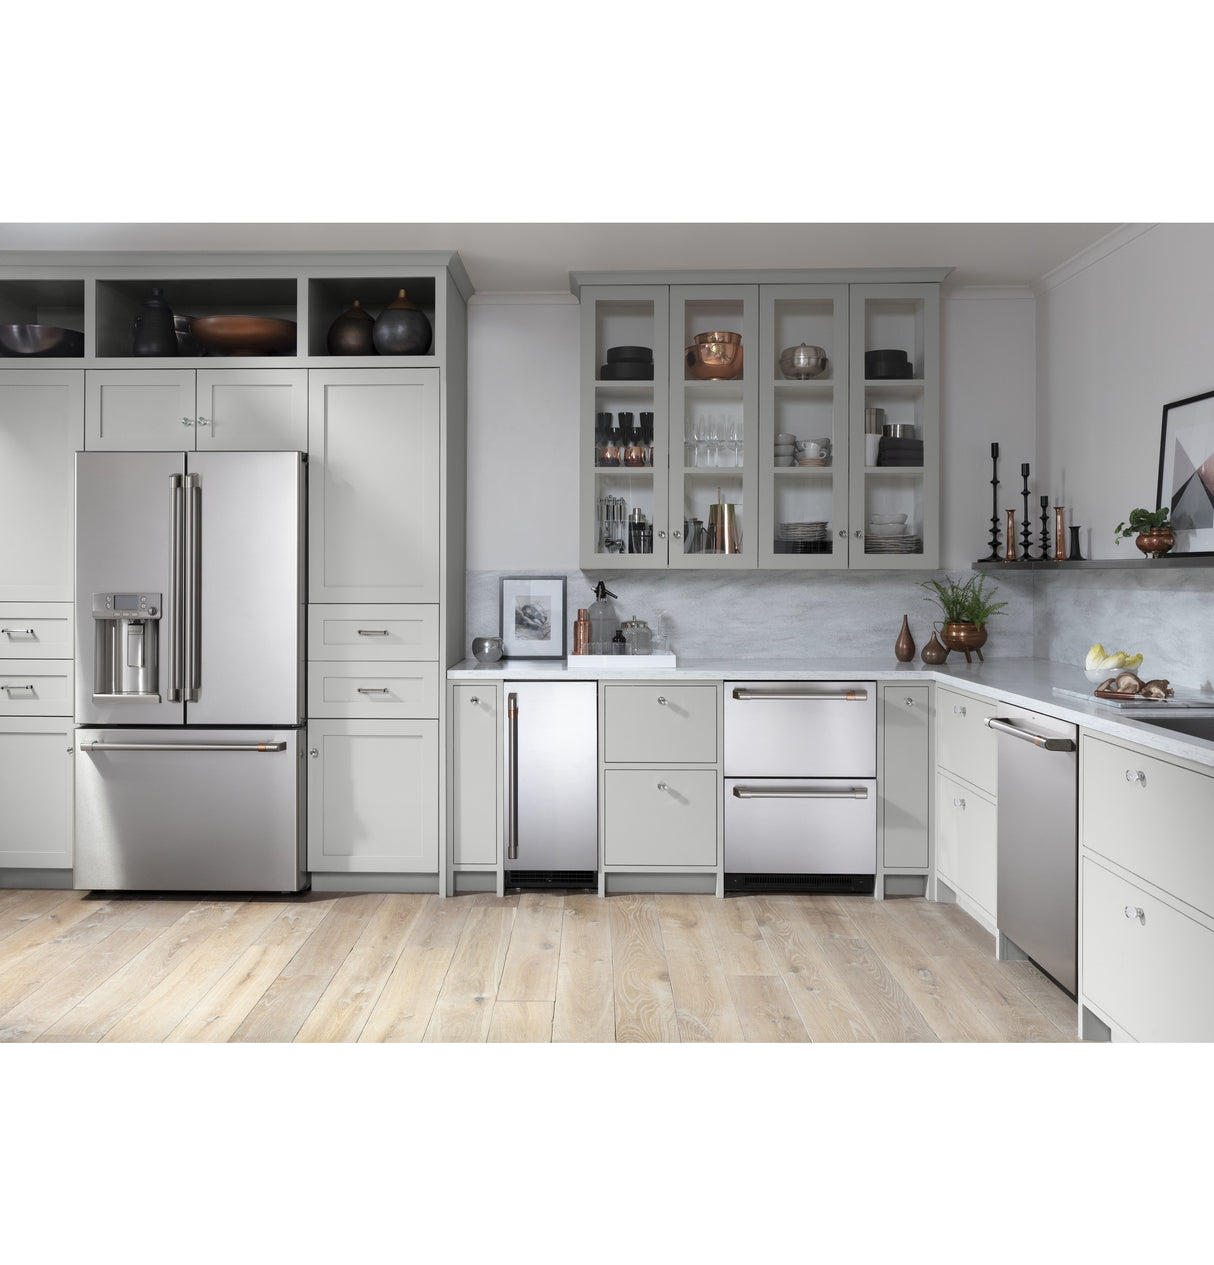 Caf(eback)(TM) ENERGY STAR(R) 22.1 Cu. Ft. Smart Counter-Depth French-Door Refrigerator with Keurig(R) K-Cup(R) Brewing System - (CYE22UP2MS1)